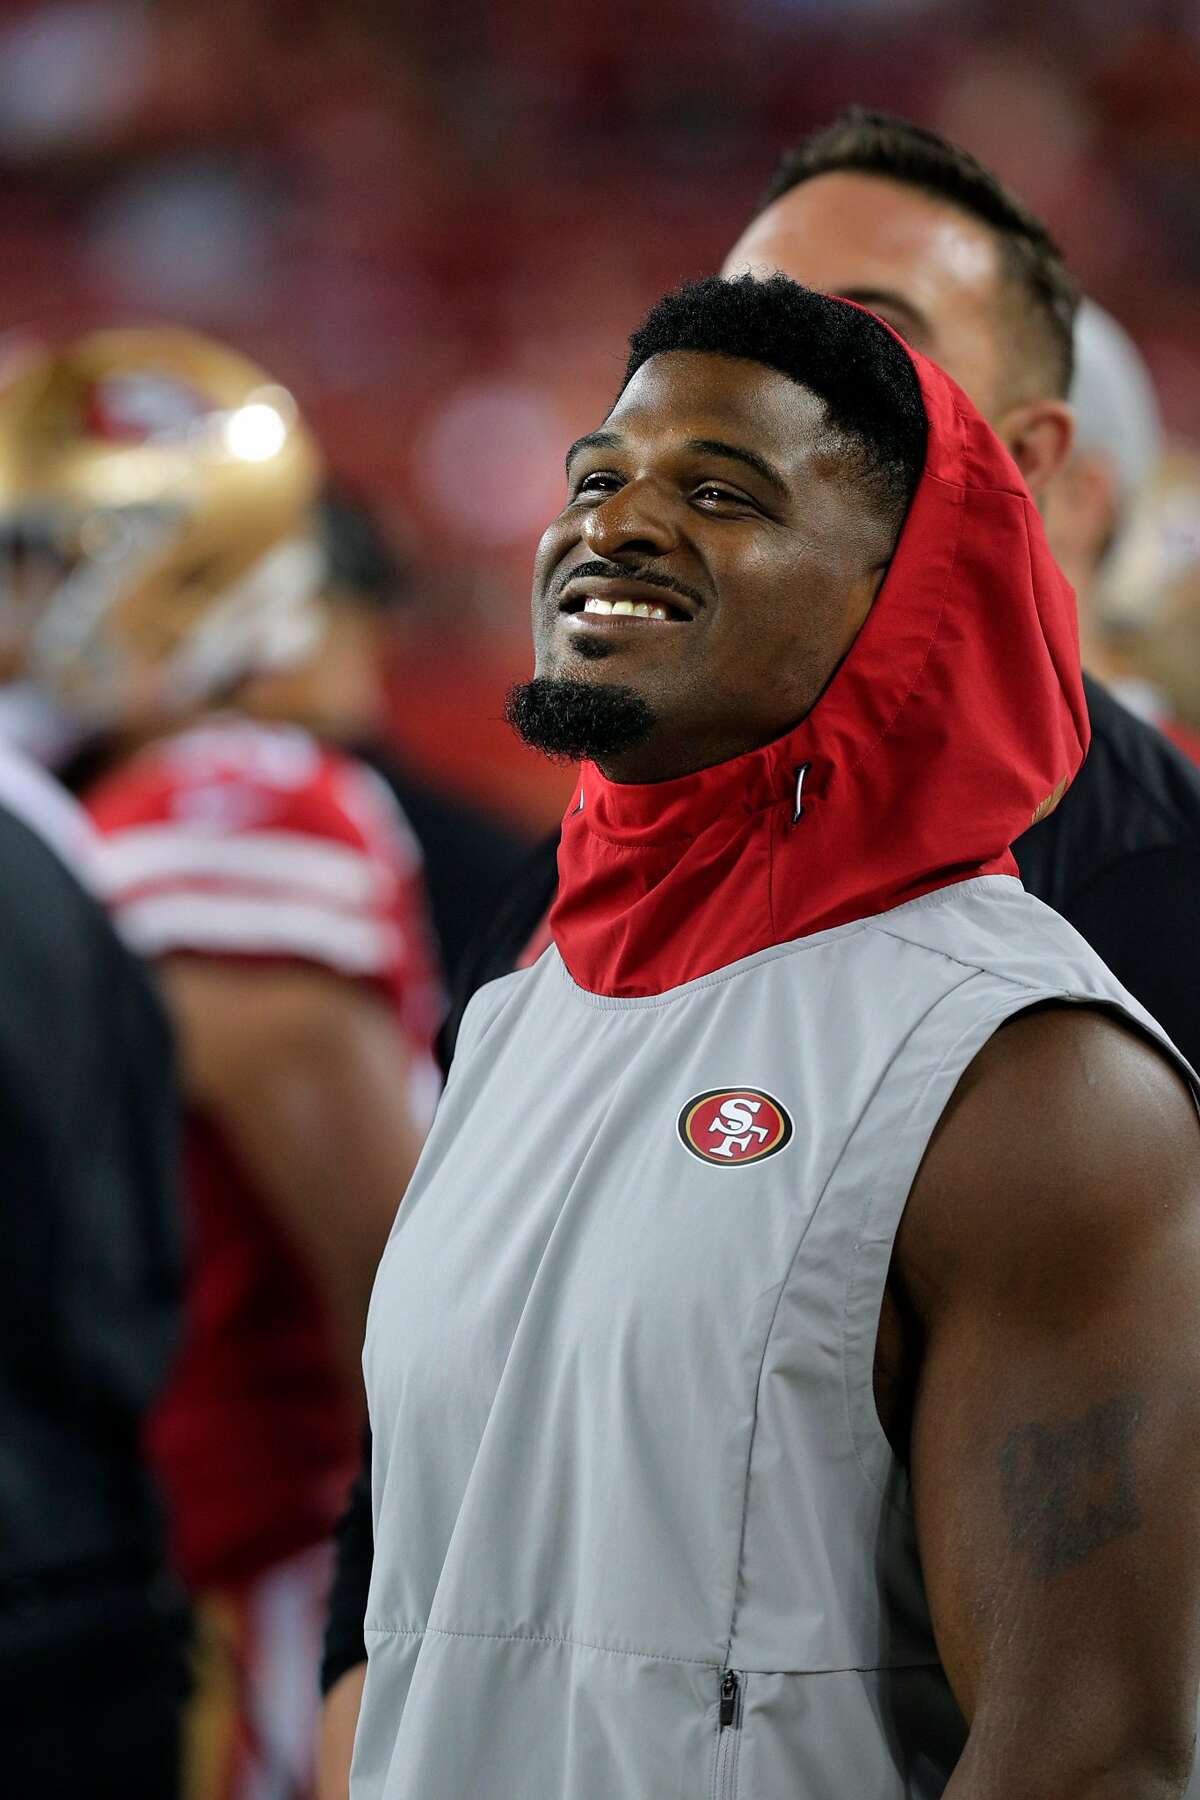 49ers's Dee Ford (55) on the sidelines as the San Francisco 49ers played the Los Angeles Chargers in a preseason NFL game at Levi’s Stadium in Santa Clara, Calif., on Thursday, August 29, 2019.